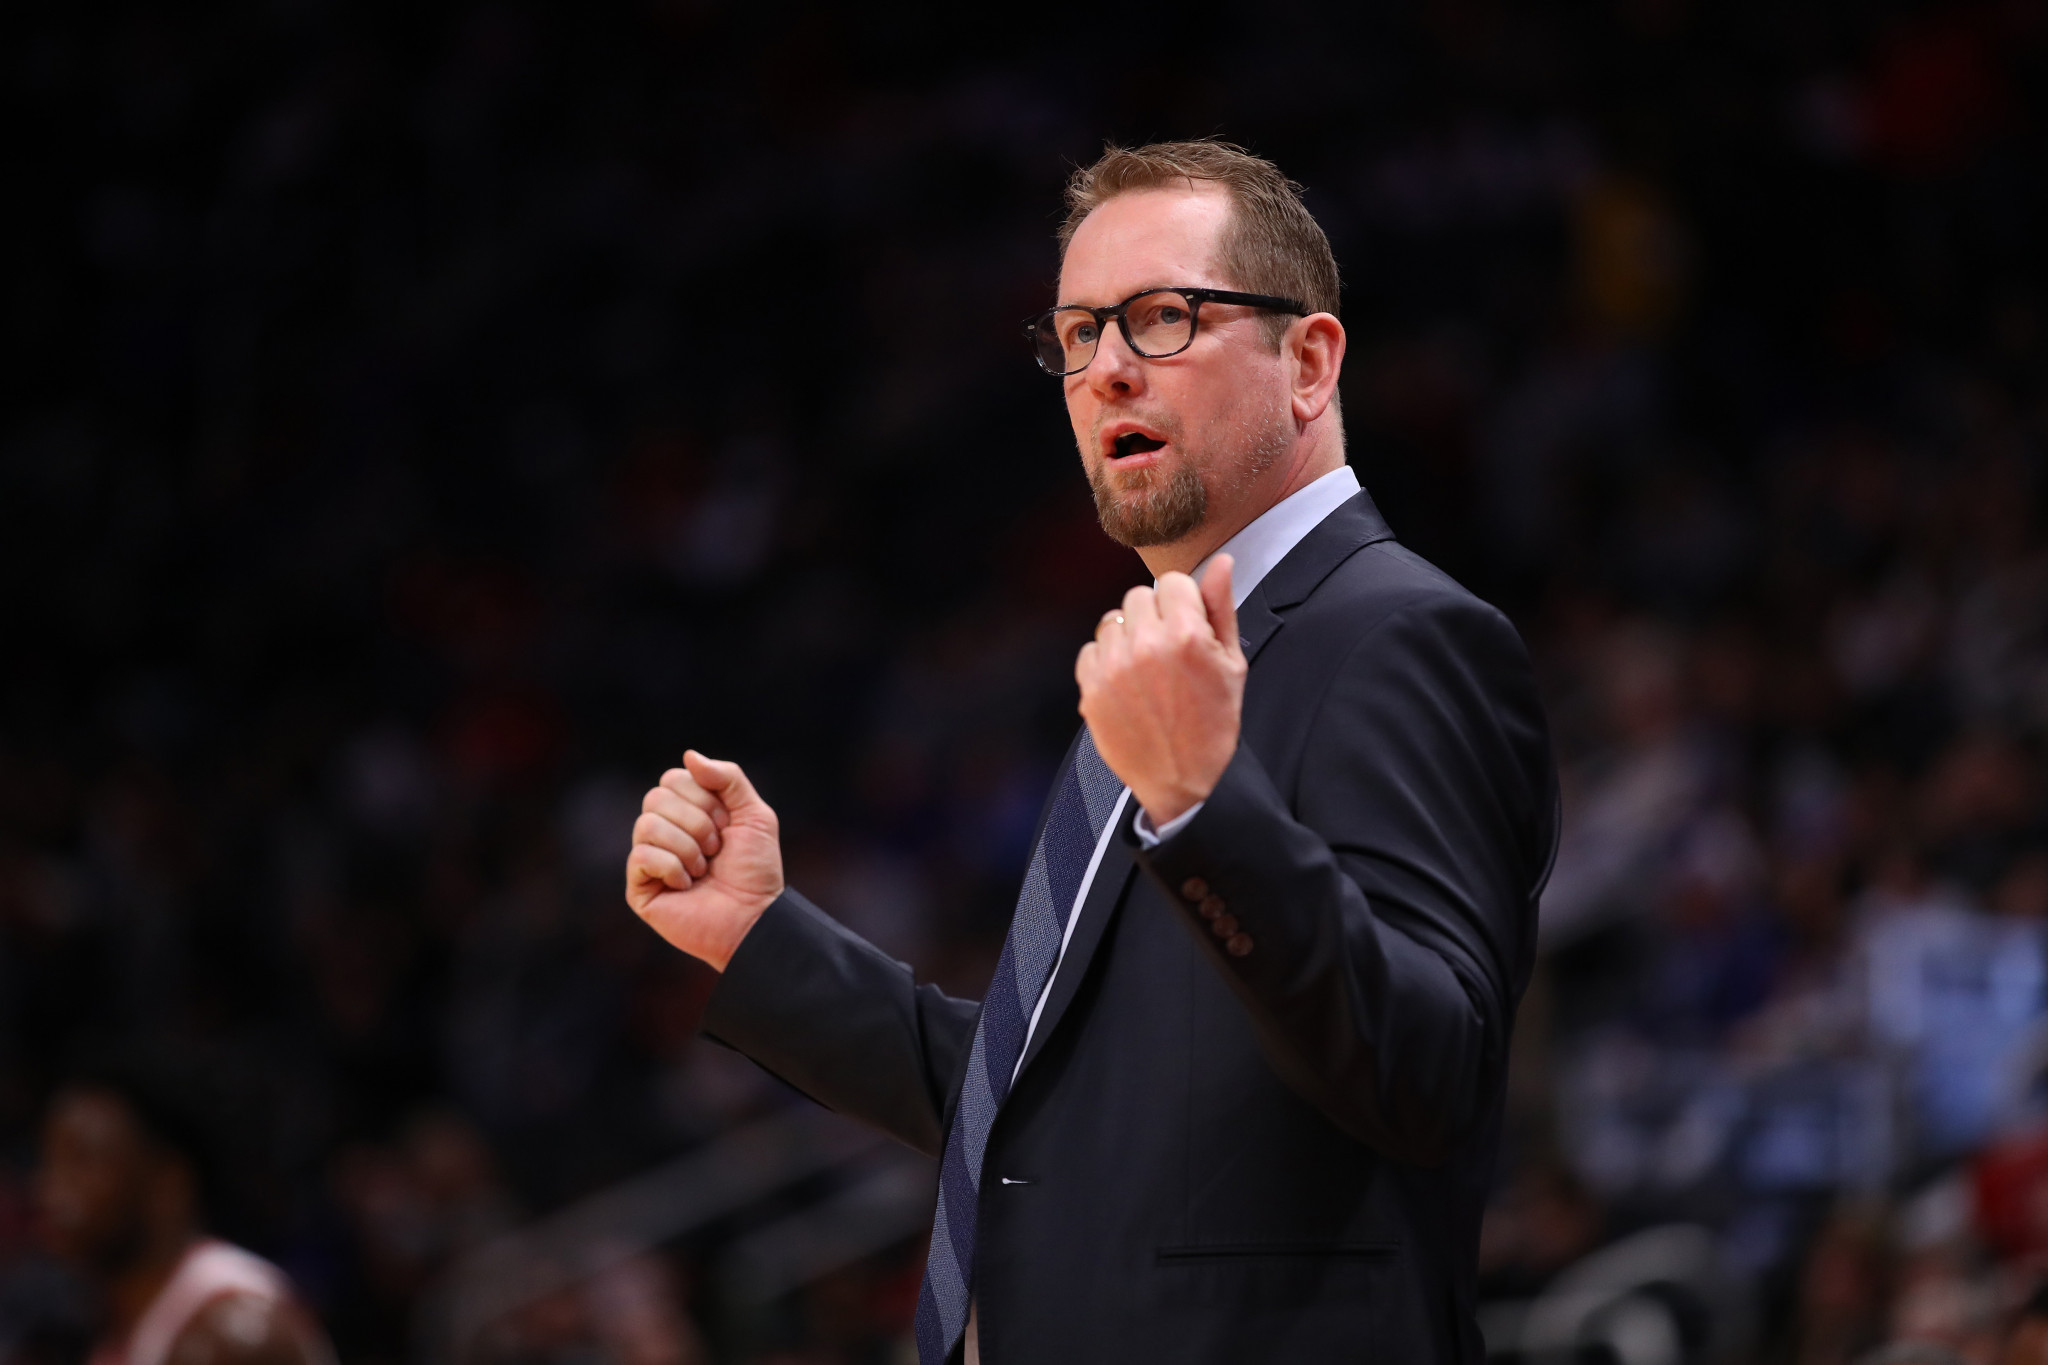 Nick Nurse received 470 points and 90 first place votes, meaning he comfortably won the NBA Coach of the Year award ©Getty Images